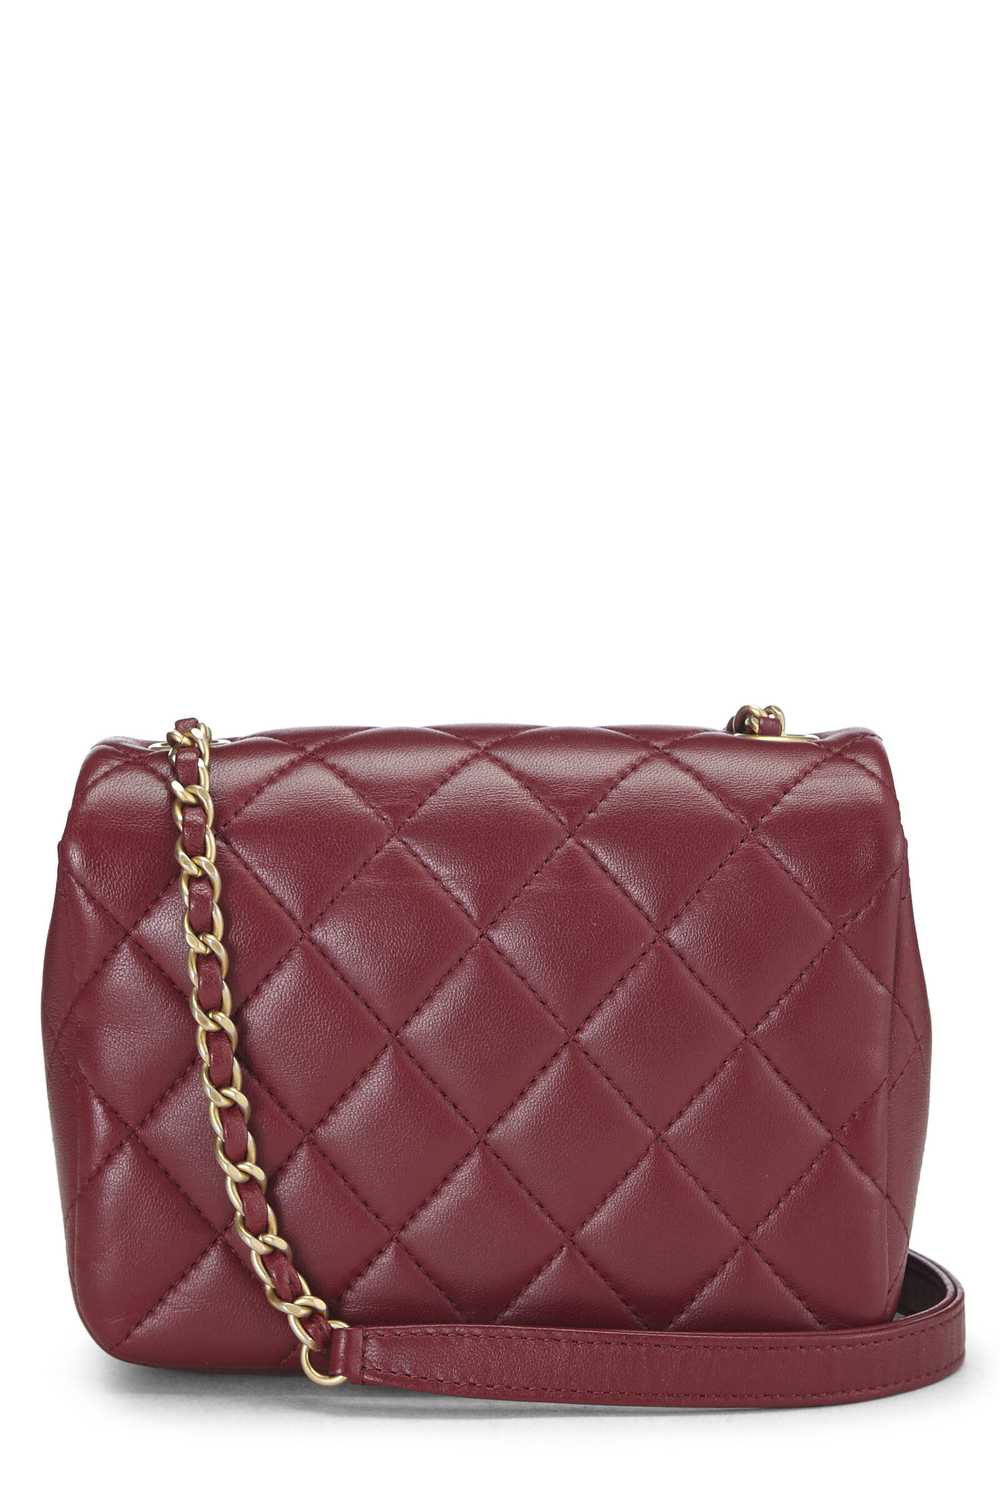 Burgundy Quilted Lambskin Crystal Flap Bag Mini - image 4